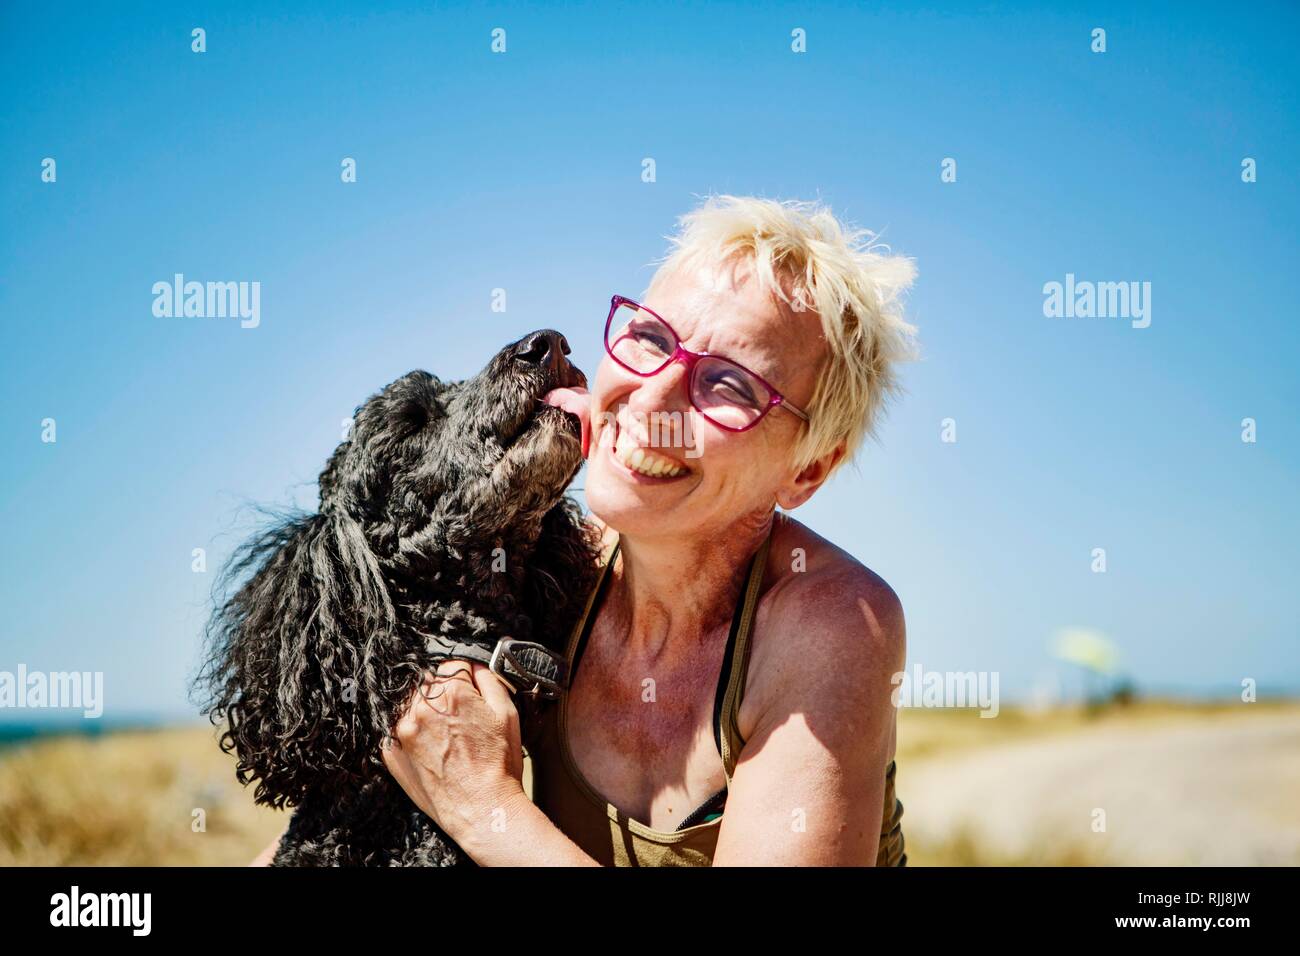 Dog, king poodle, licking the face of a laughing woman, Portbail, Normandy, France Stock Photo